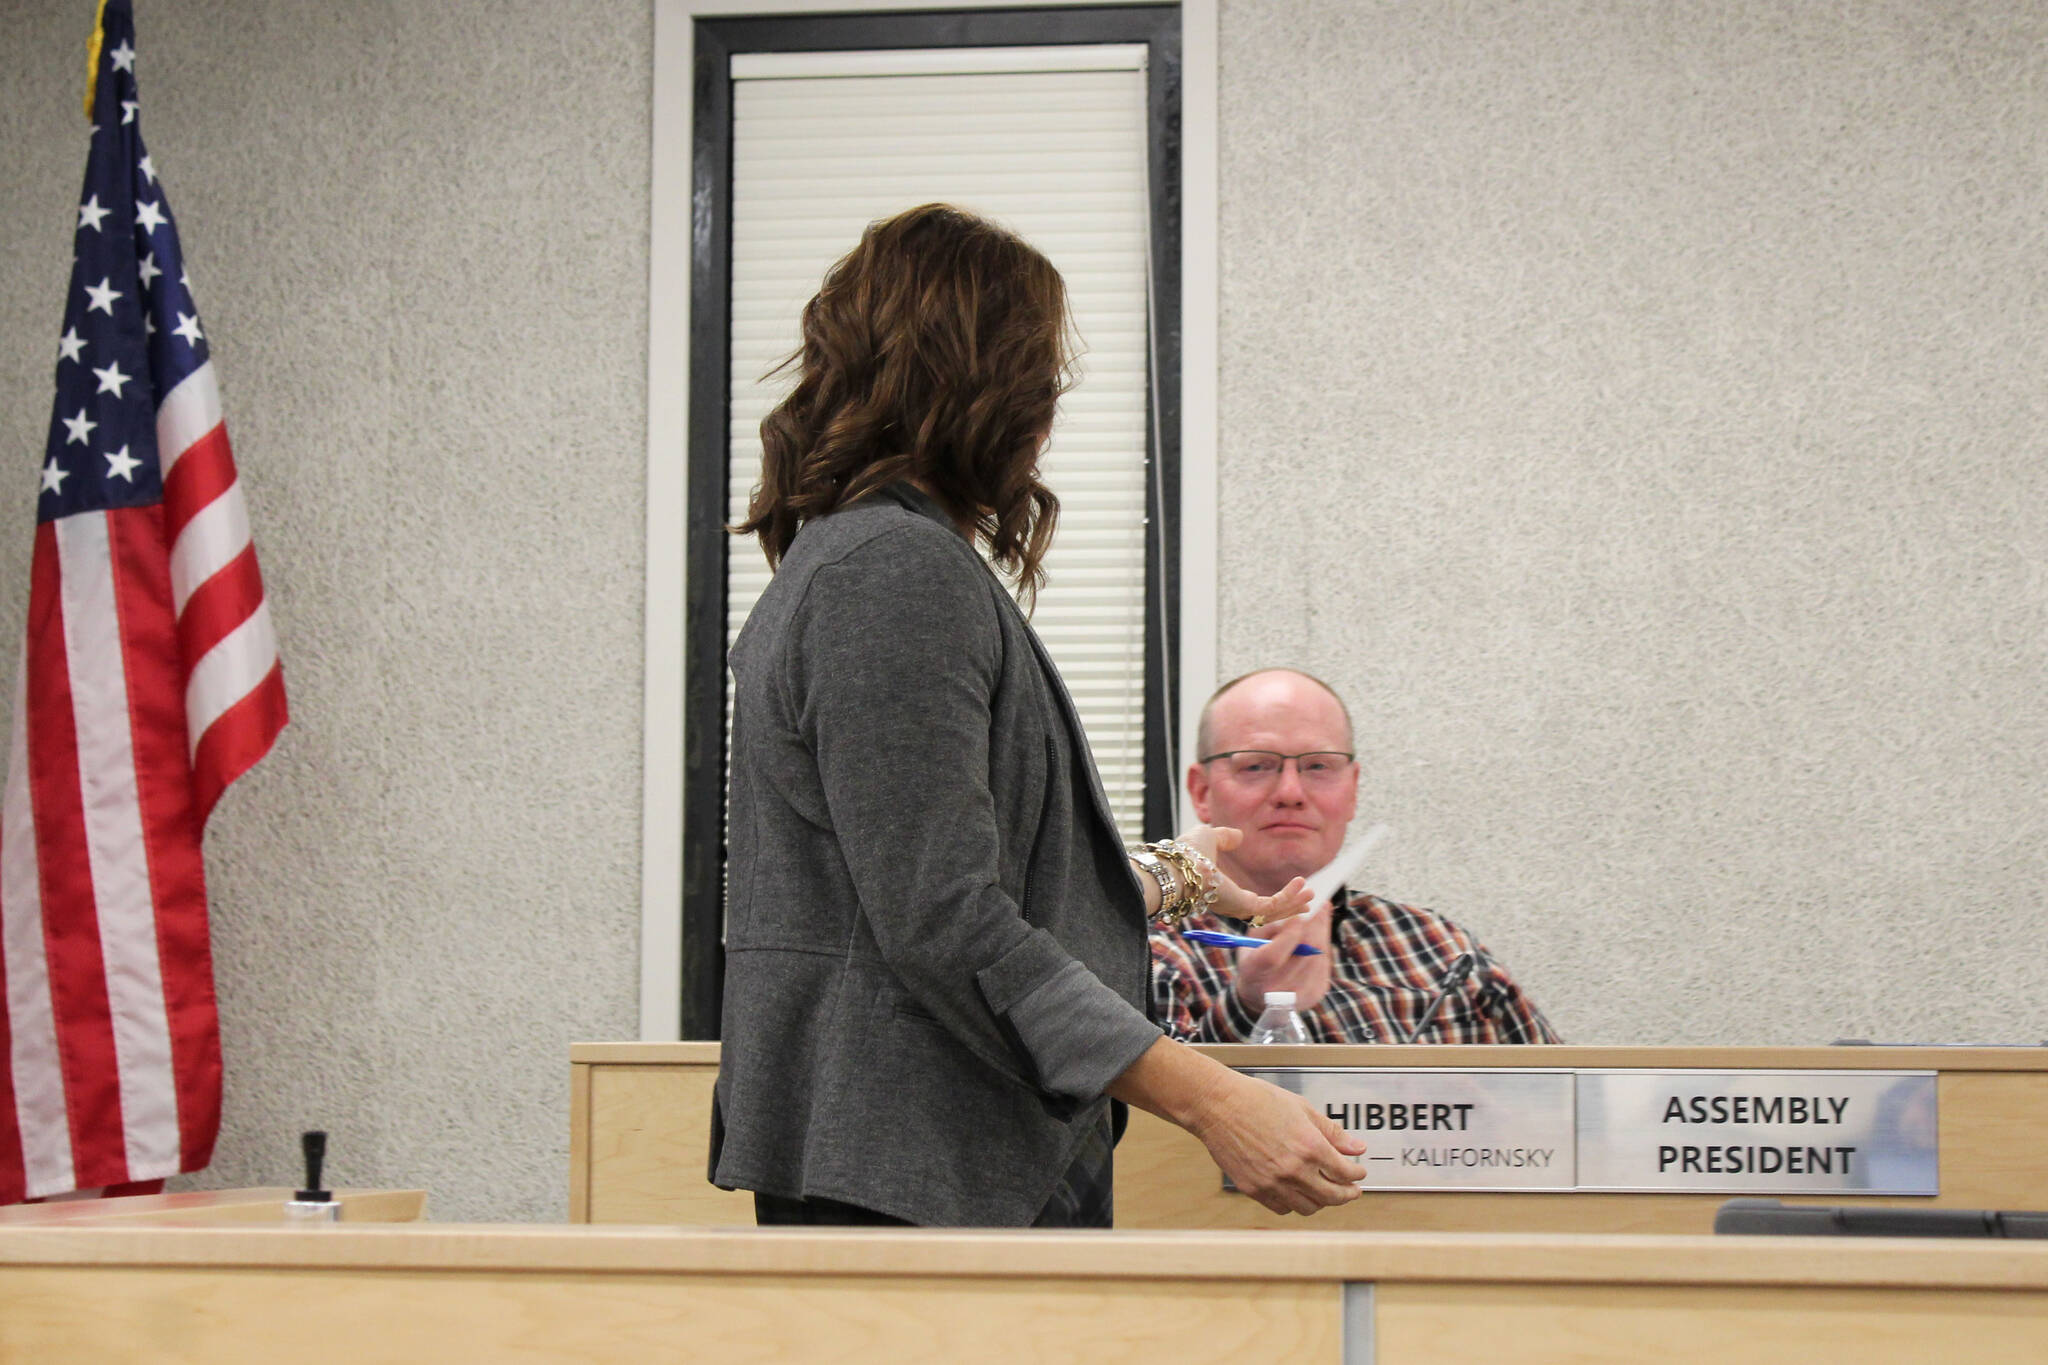 Kenai Peninsula Borough Clerk Johni Blankenship collects a ballot from assembly member Brent Hibbert on Tuesday, Oct. 26, 2021 in Soldotna, Alaska. The assembly elected a new president and vice president during a meeting on Tuesday. (Photo by Ashlyn O’Hara/Peninsula Clarion)